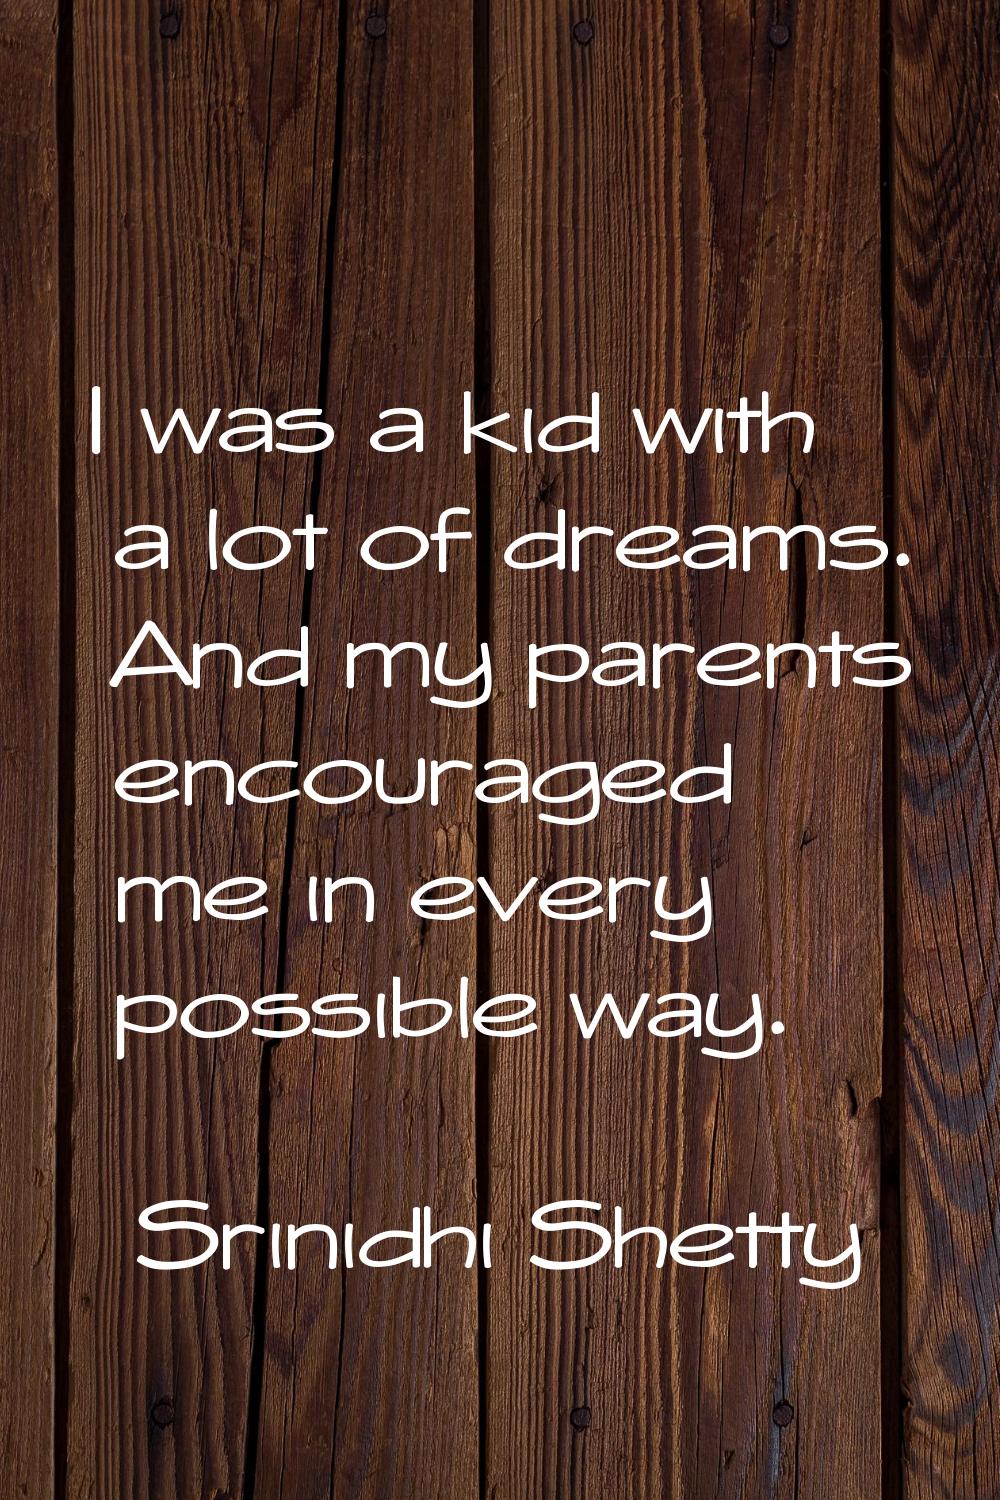 I was a kid with a lot of dreams. And my parents encouraged me in every possible way.